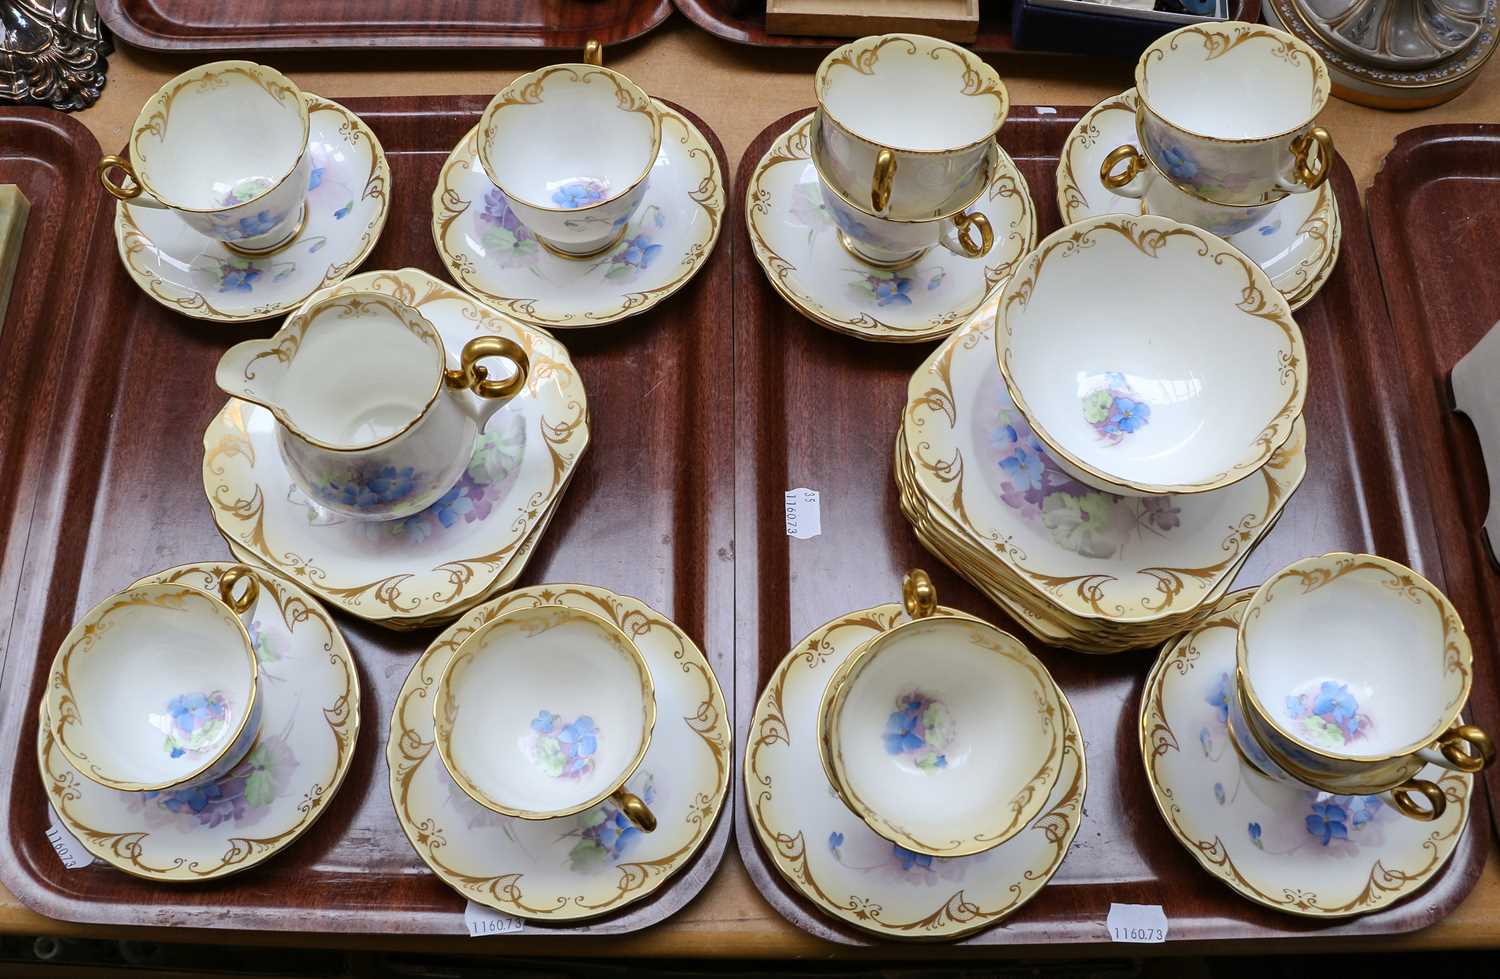 A 1920's/30's Shelley part tea service decorated with blue floral sprays (two trays)